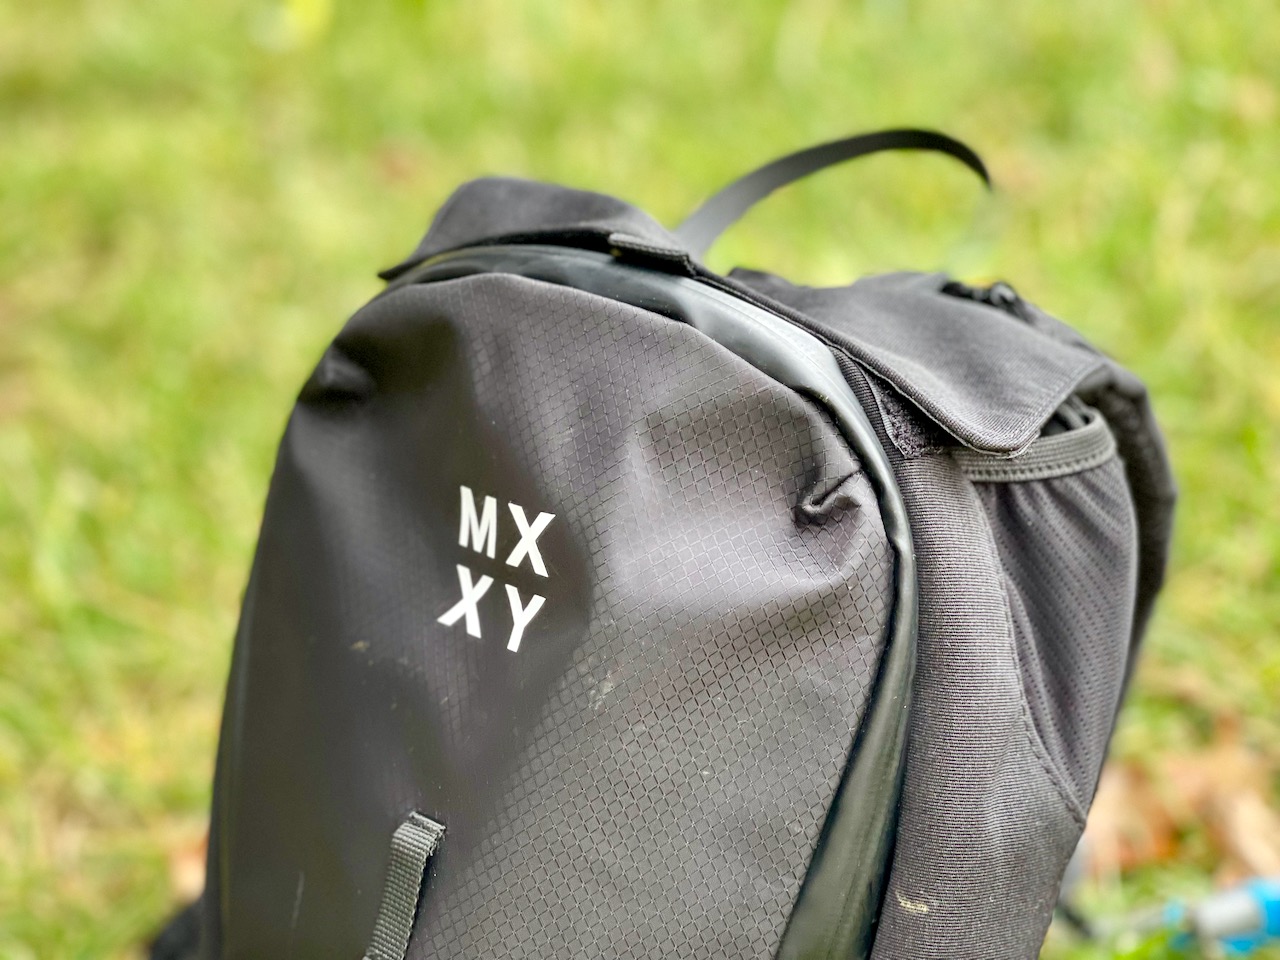 MXXY hydration pack close up